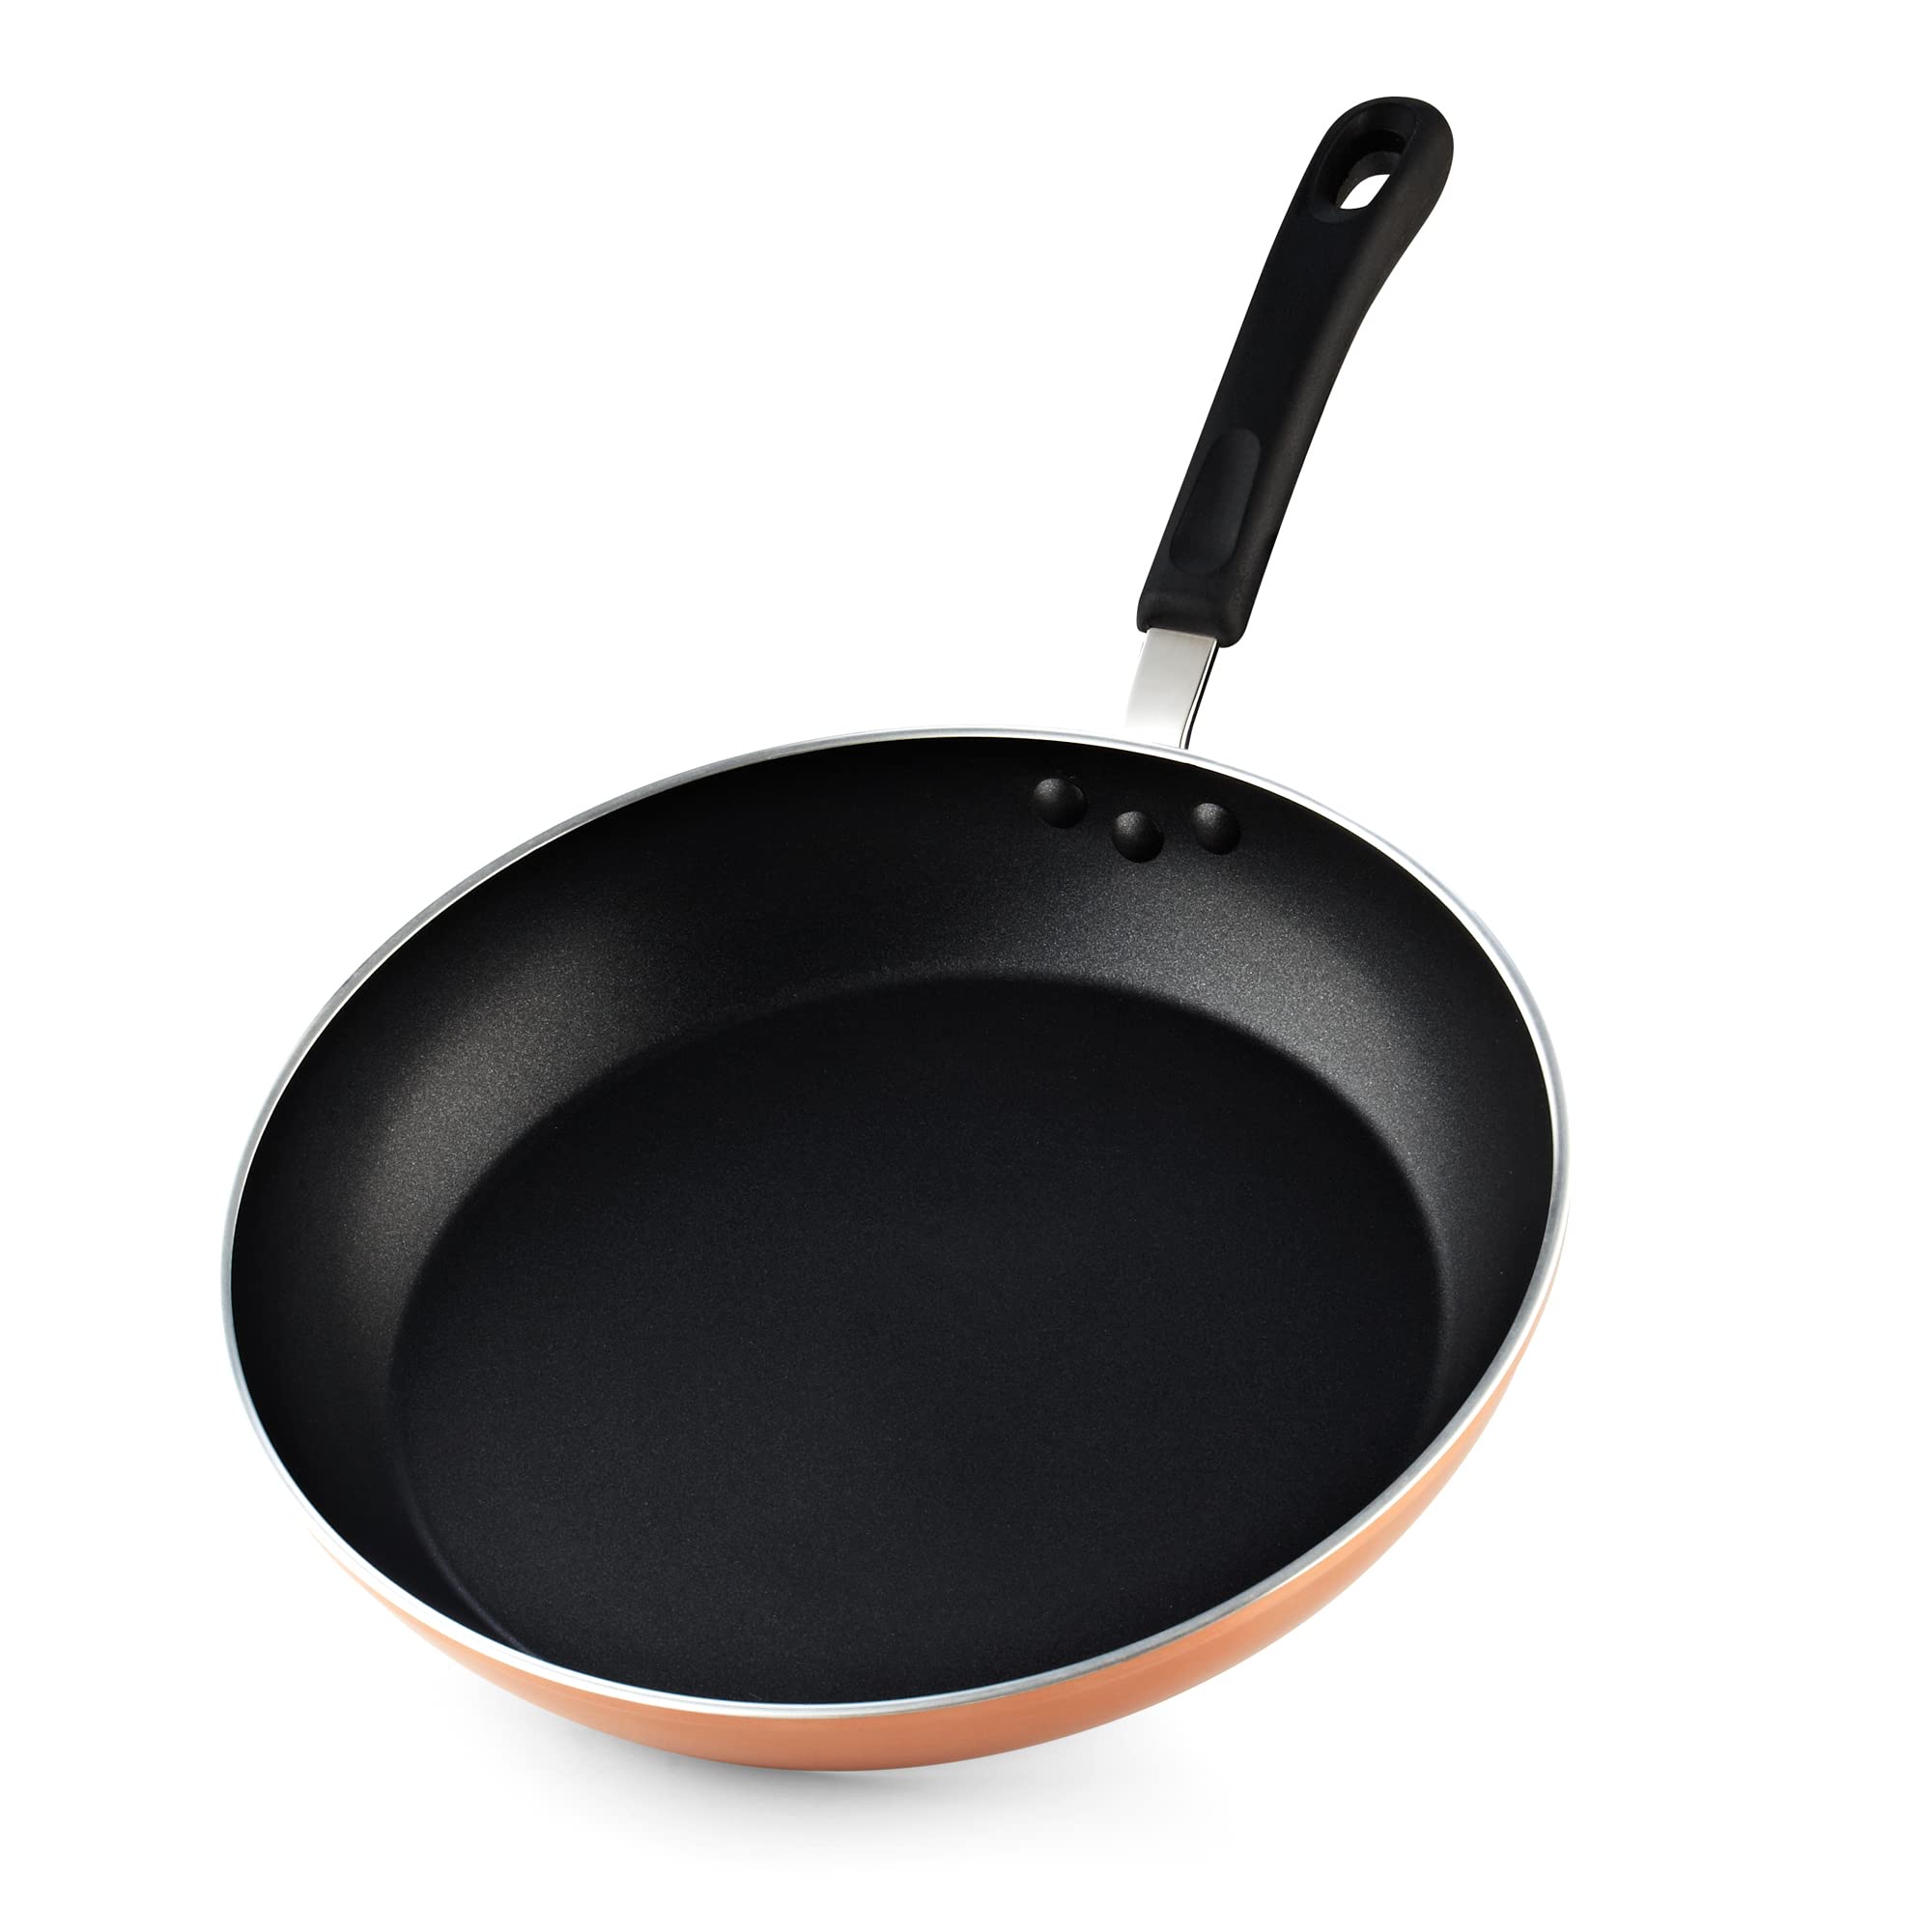 Cook N Home Nonstick Frying Pan Skillet, 8-inch, 9.5-inch, 12-Inch, 3-Piece Set Sauté Fry Pan Omelet Egg Pan Induction Cookware, Copper